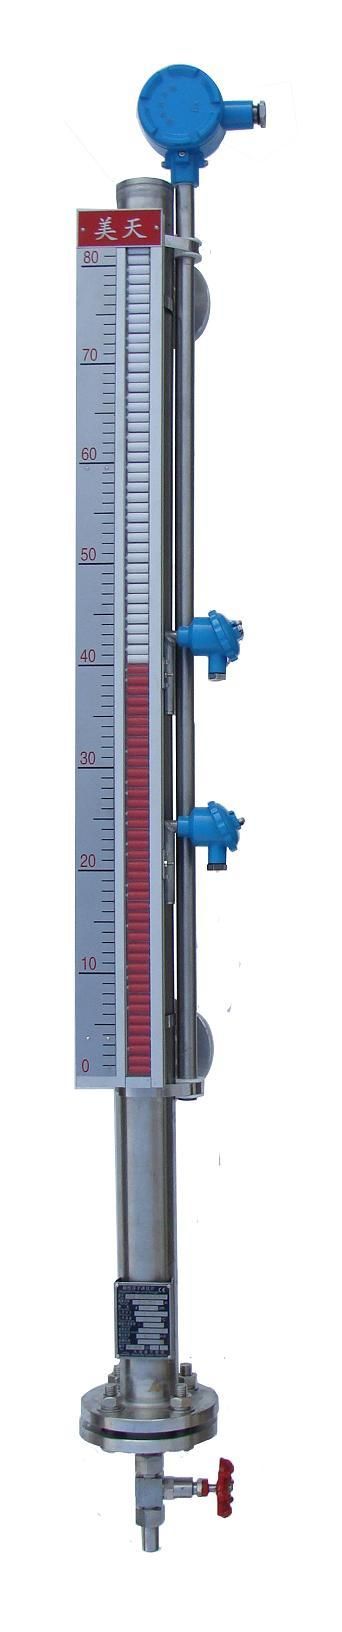 Magnetic Float Level Meter (Anti-Frost)